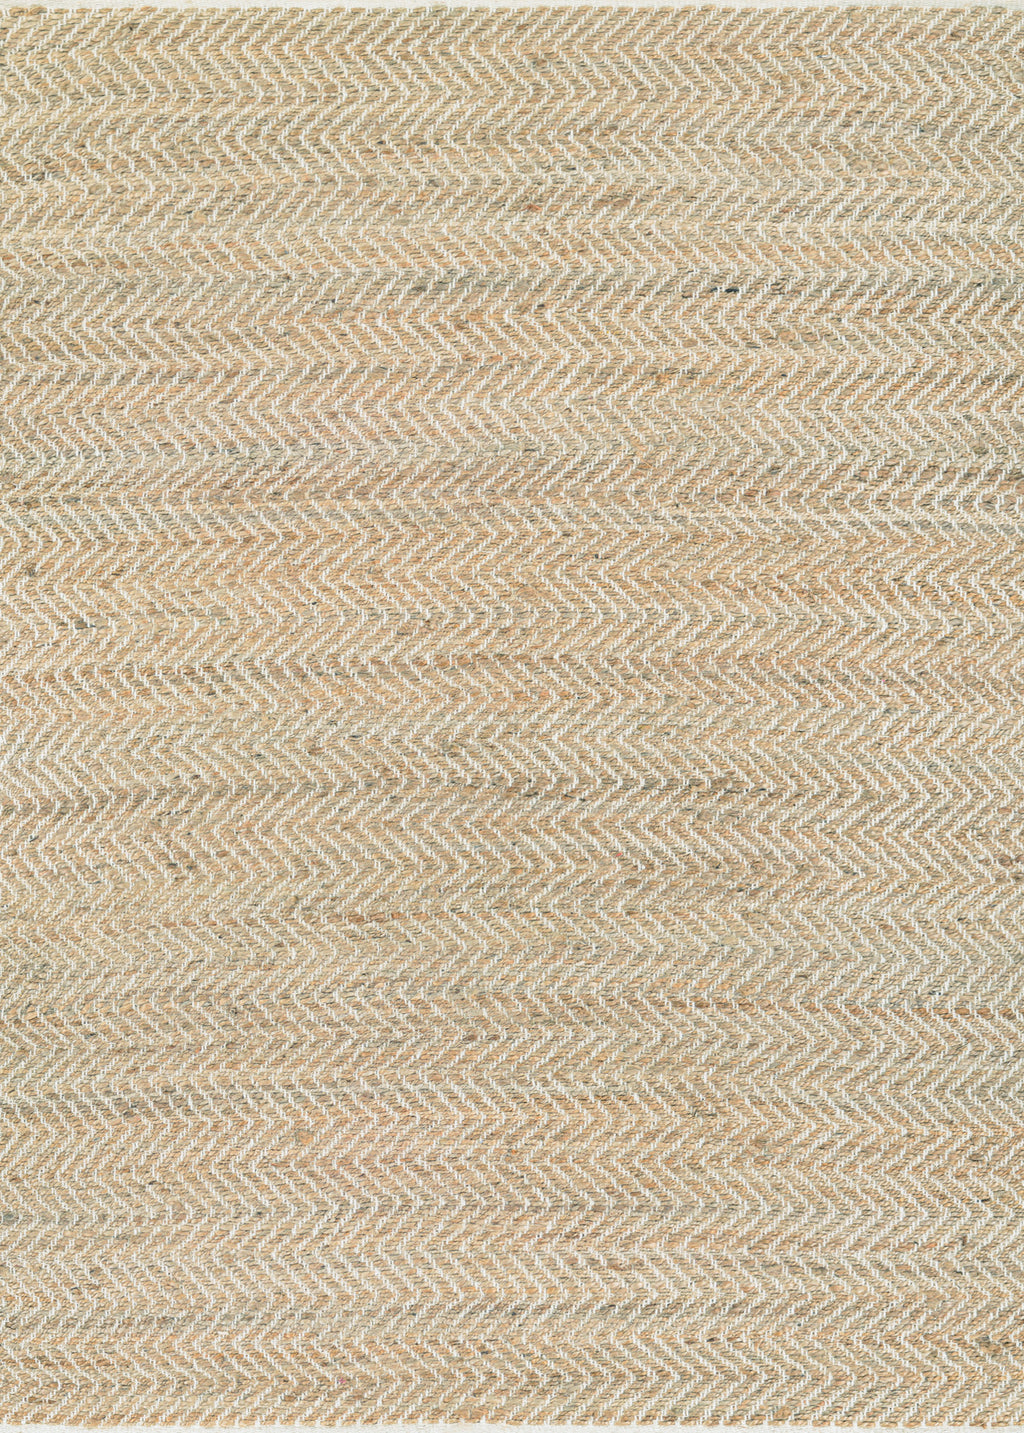 Couristan Nature's Elements Gravity Natural/Tan Area Rug